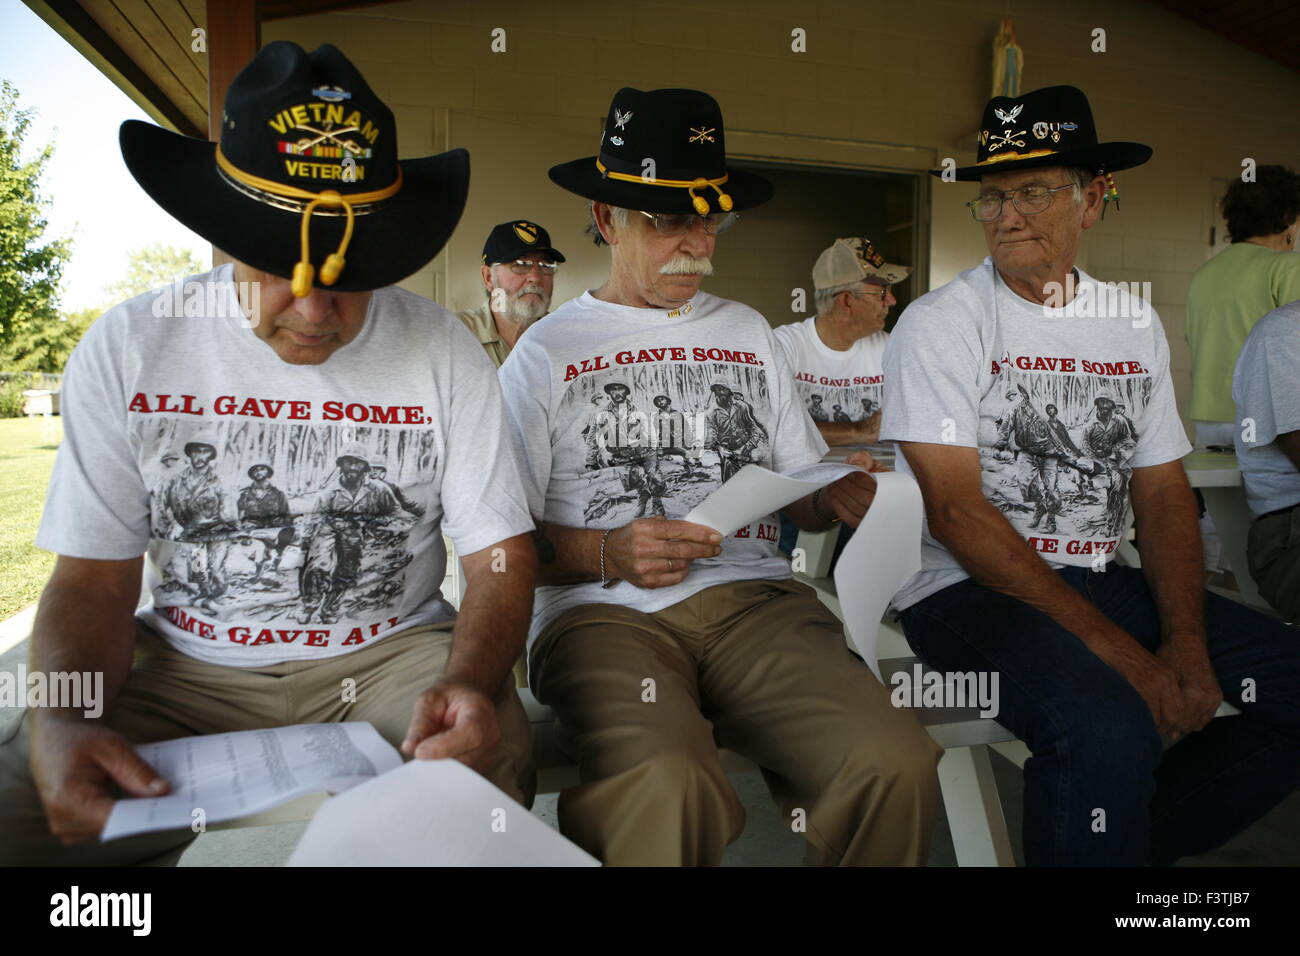 Vietnam Veterans of B Company, 7th Cavalry, who fought in the Battle of Ia Drang, and battles afterwards, read the names of their war dead during a memorial ceremony. Jack Zallen, who was in the cutoff platoon during the battle at LX Xray, is seated at center. Billy Smith, right, was a replacement after the battle and he fought in the Bon Song plain. Smith said one time his shirt was torn to shreds by bullets that passed over him during a battle in a cemetery that left the Cavalrymen pinned down.   B Co. 1/7th Cavalry Reunion in Effingham, Illinois. July 31-Aug2, 2009. Stock Photo